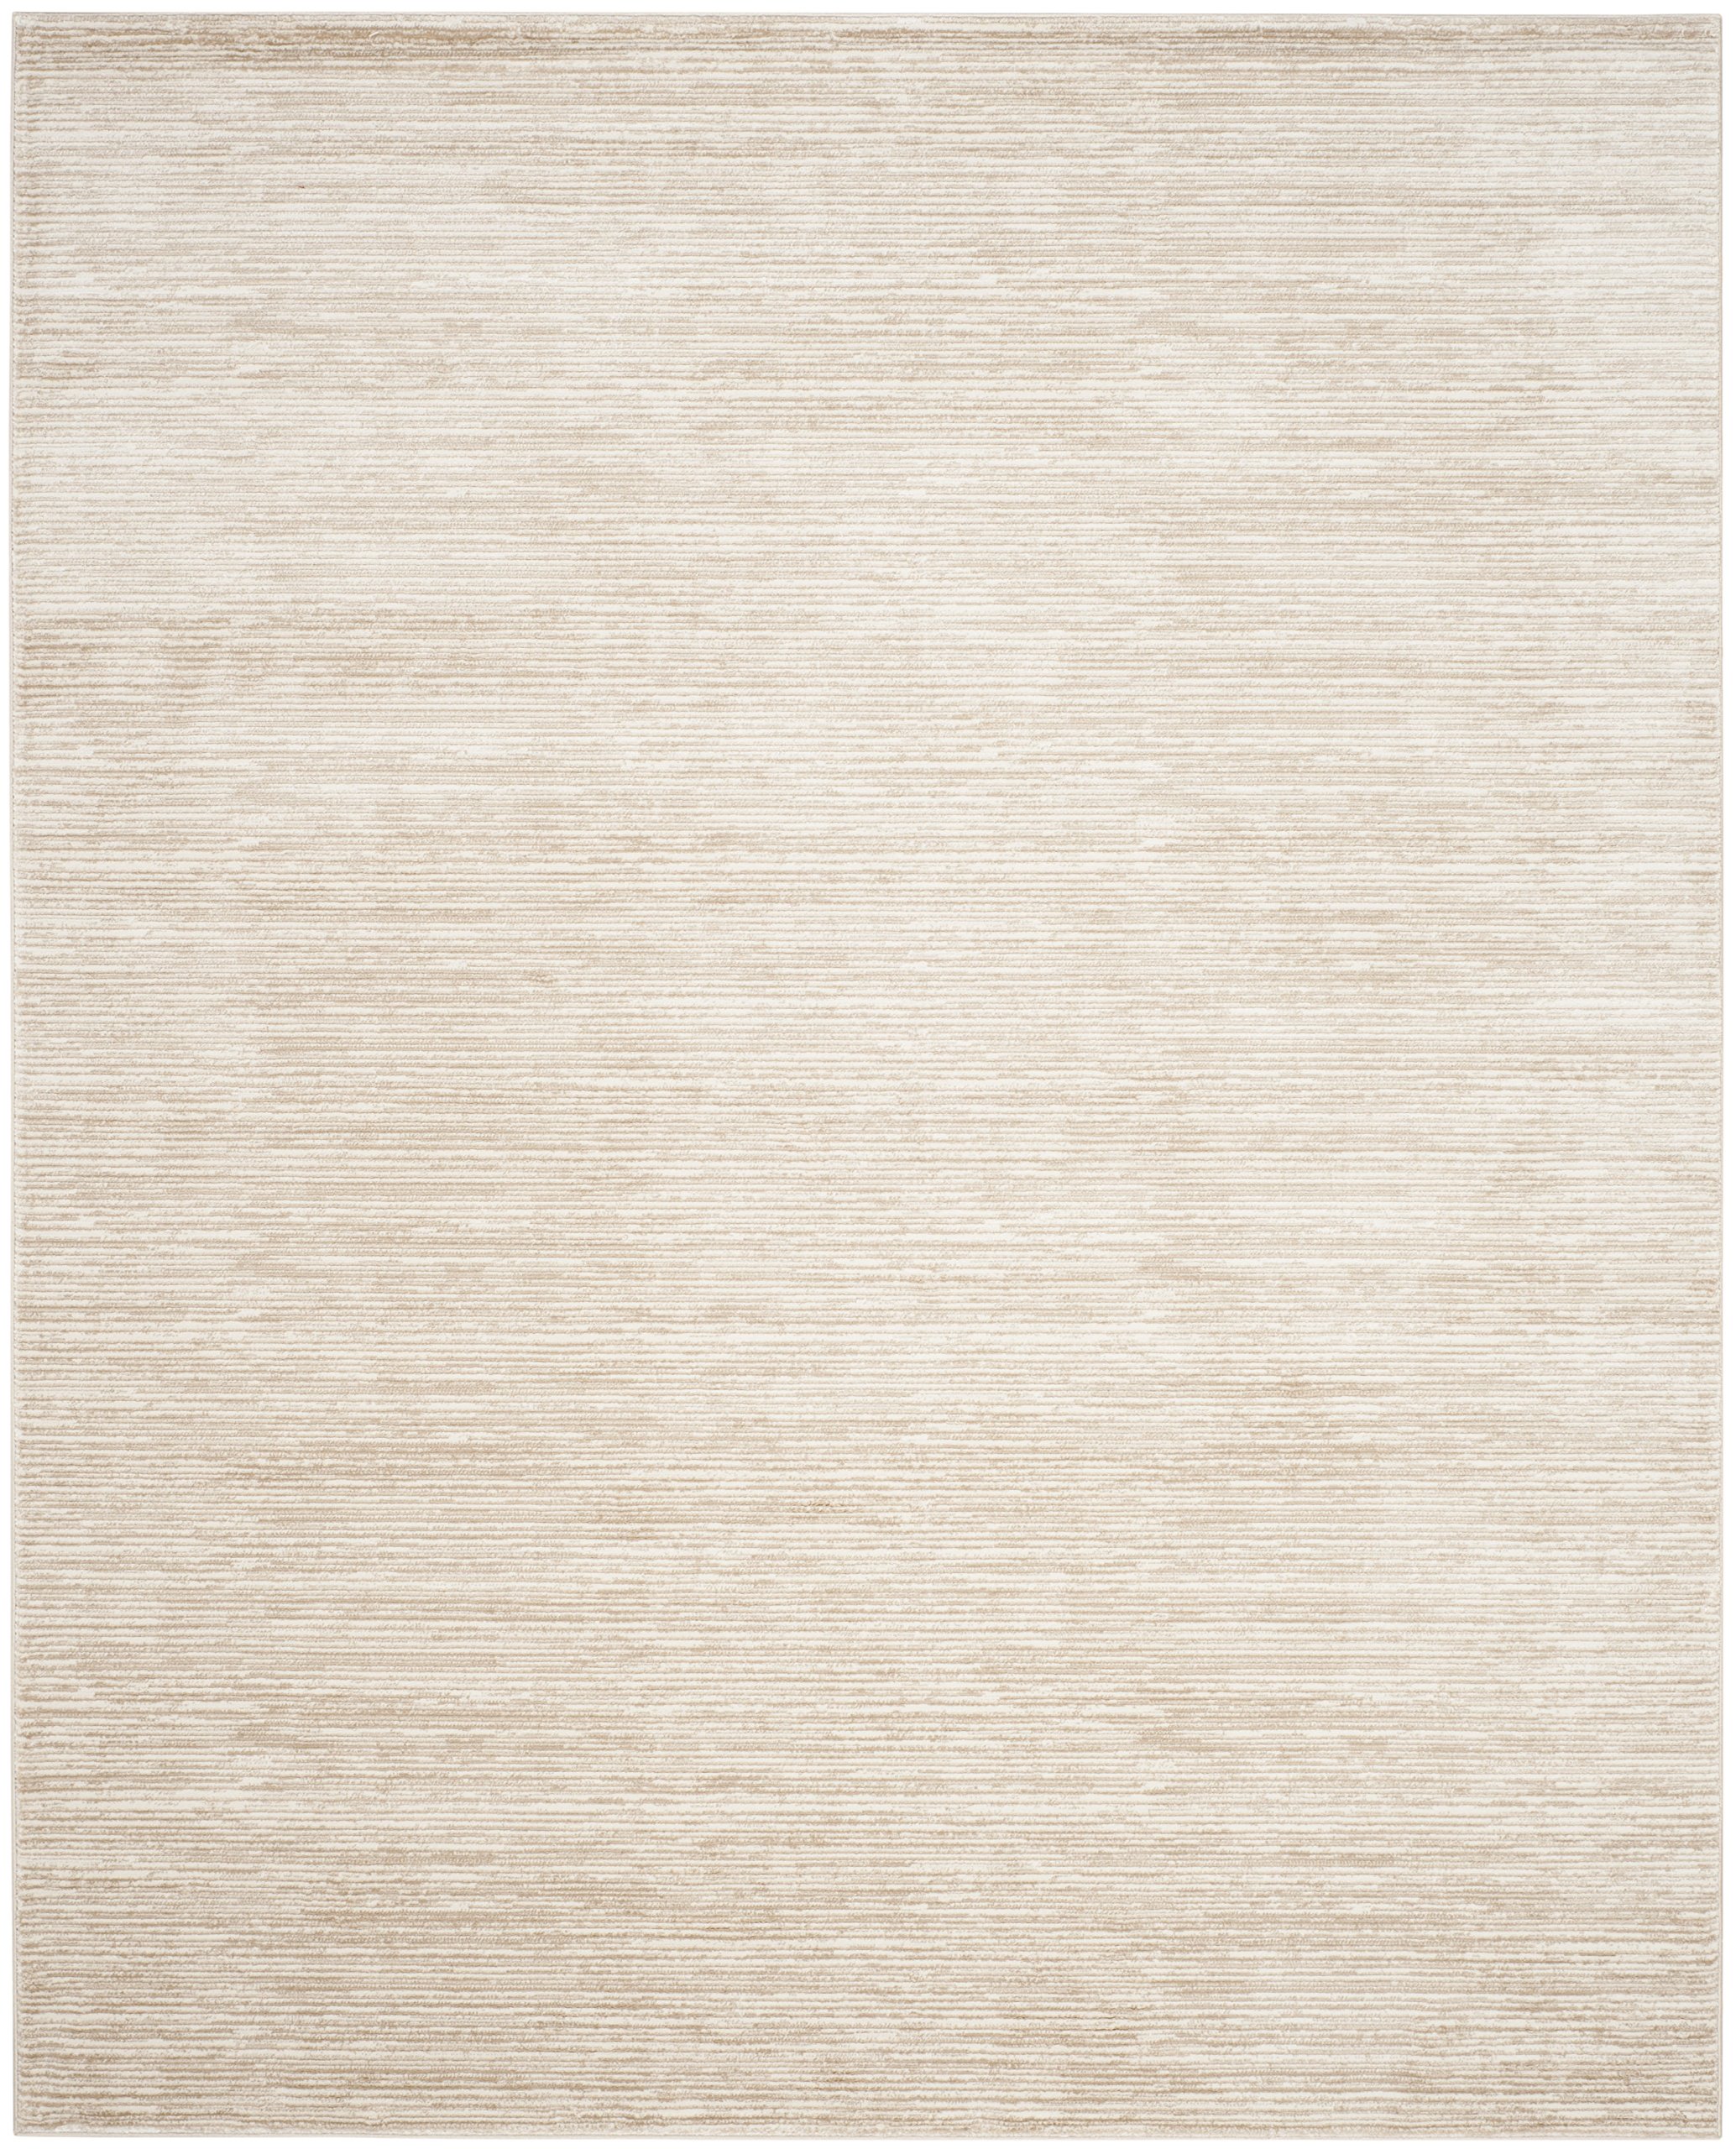 SAFAVIEH Vision Collection 8' x 10' Cream VSN606F Modern Ombre Tonal Chic Non-Shedding Living Room Bedroom Dining Home Office Area Rug